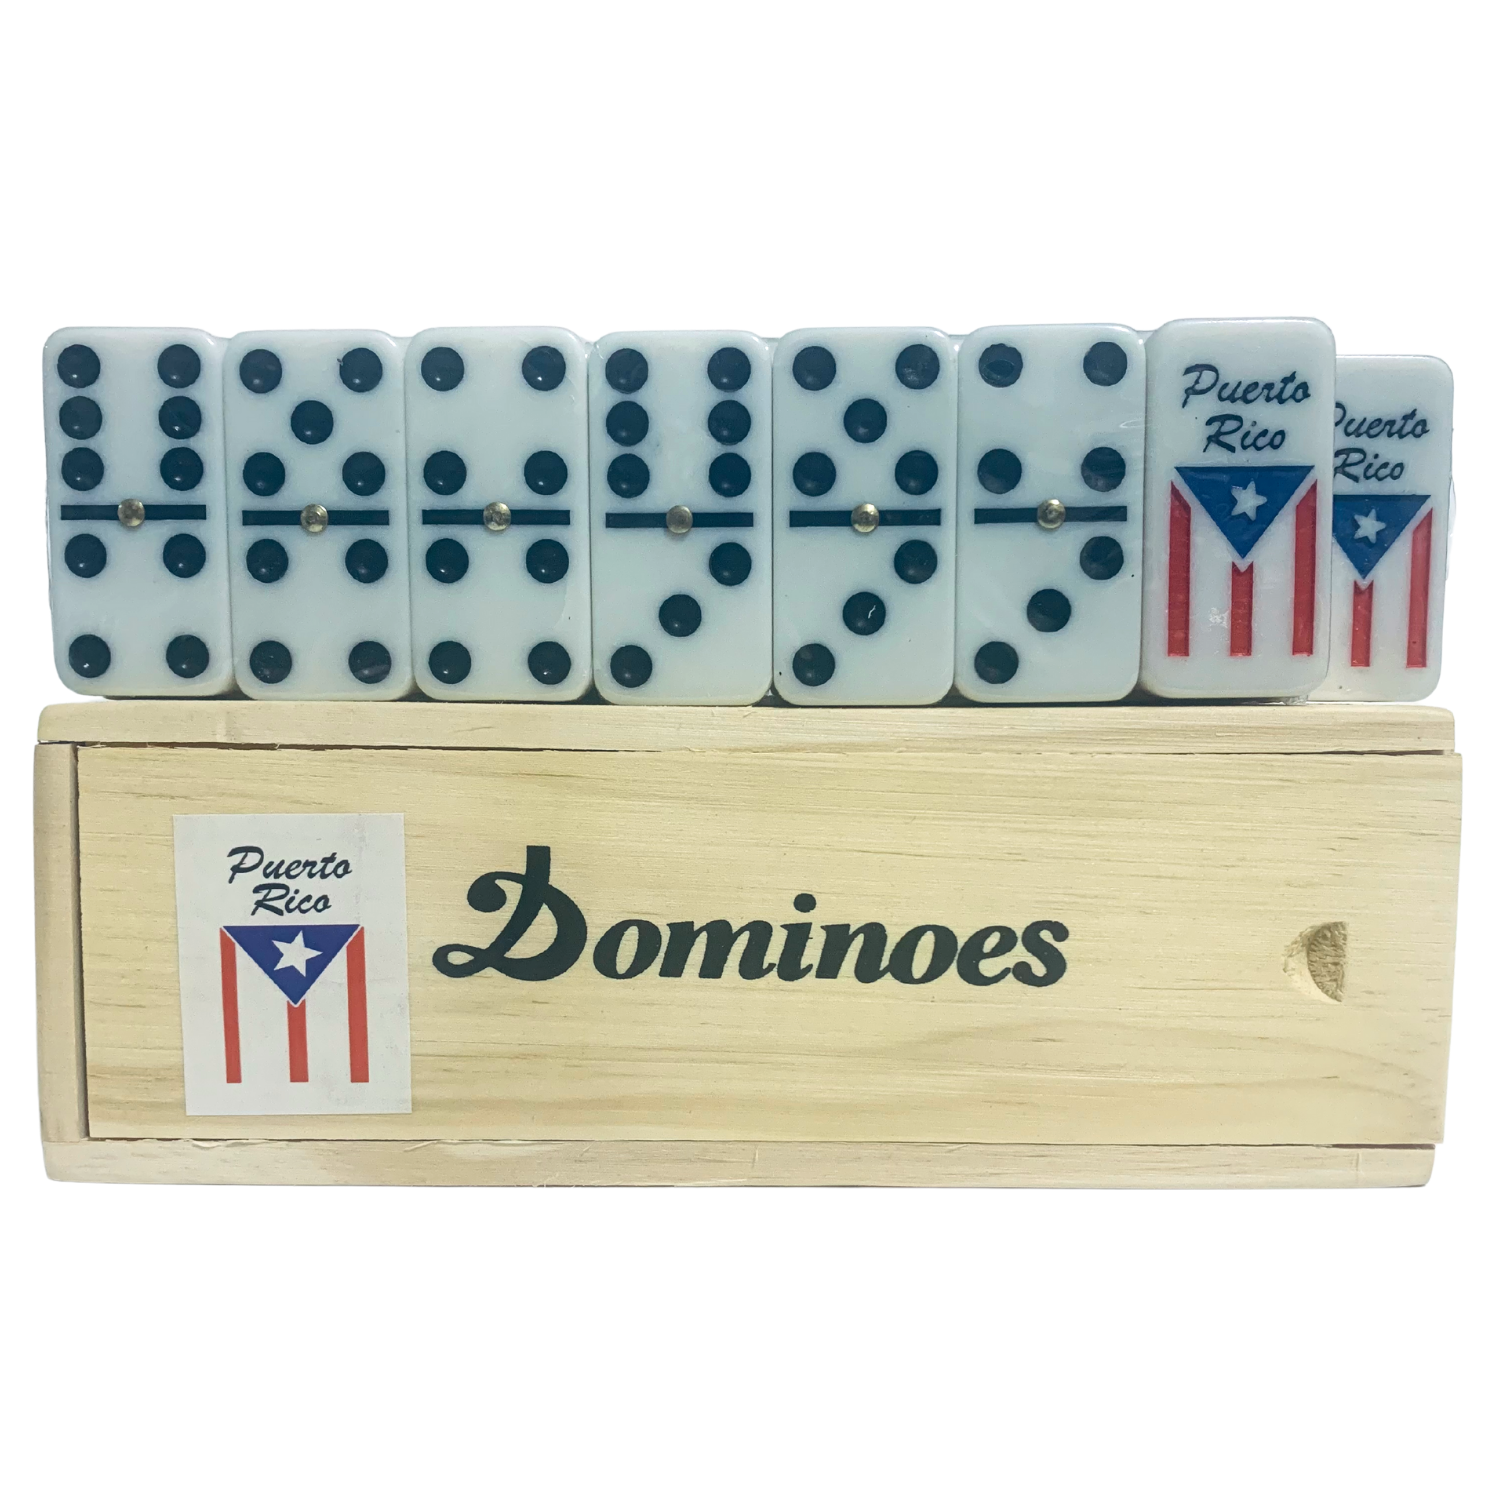 Primary image for Puerto Rico Full Size Double Six Dominoes: Flag, Wooden Box